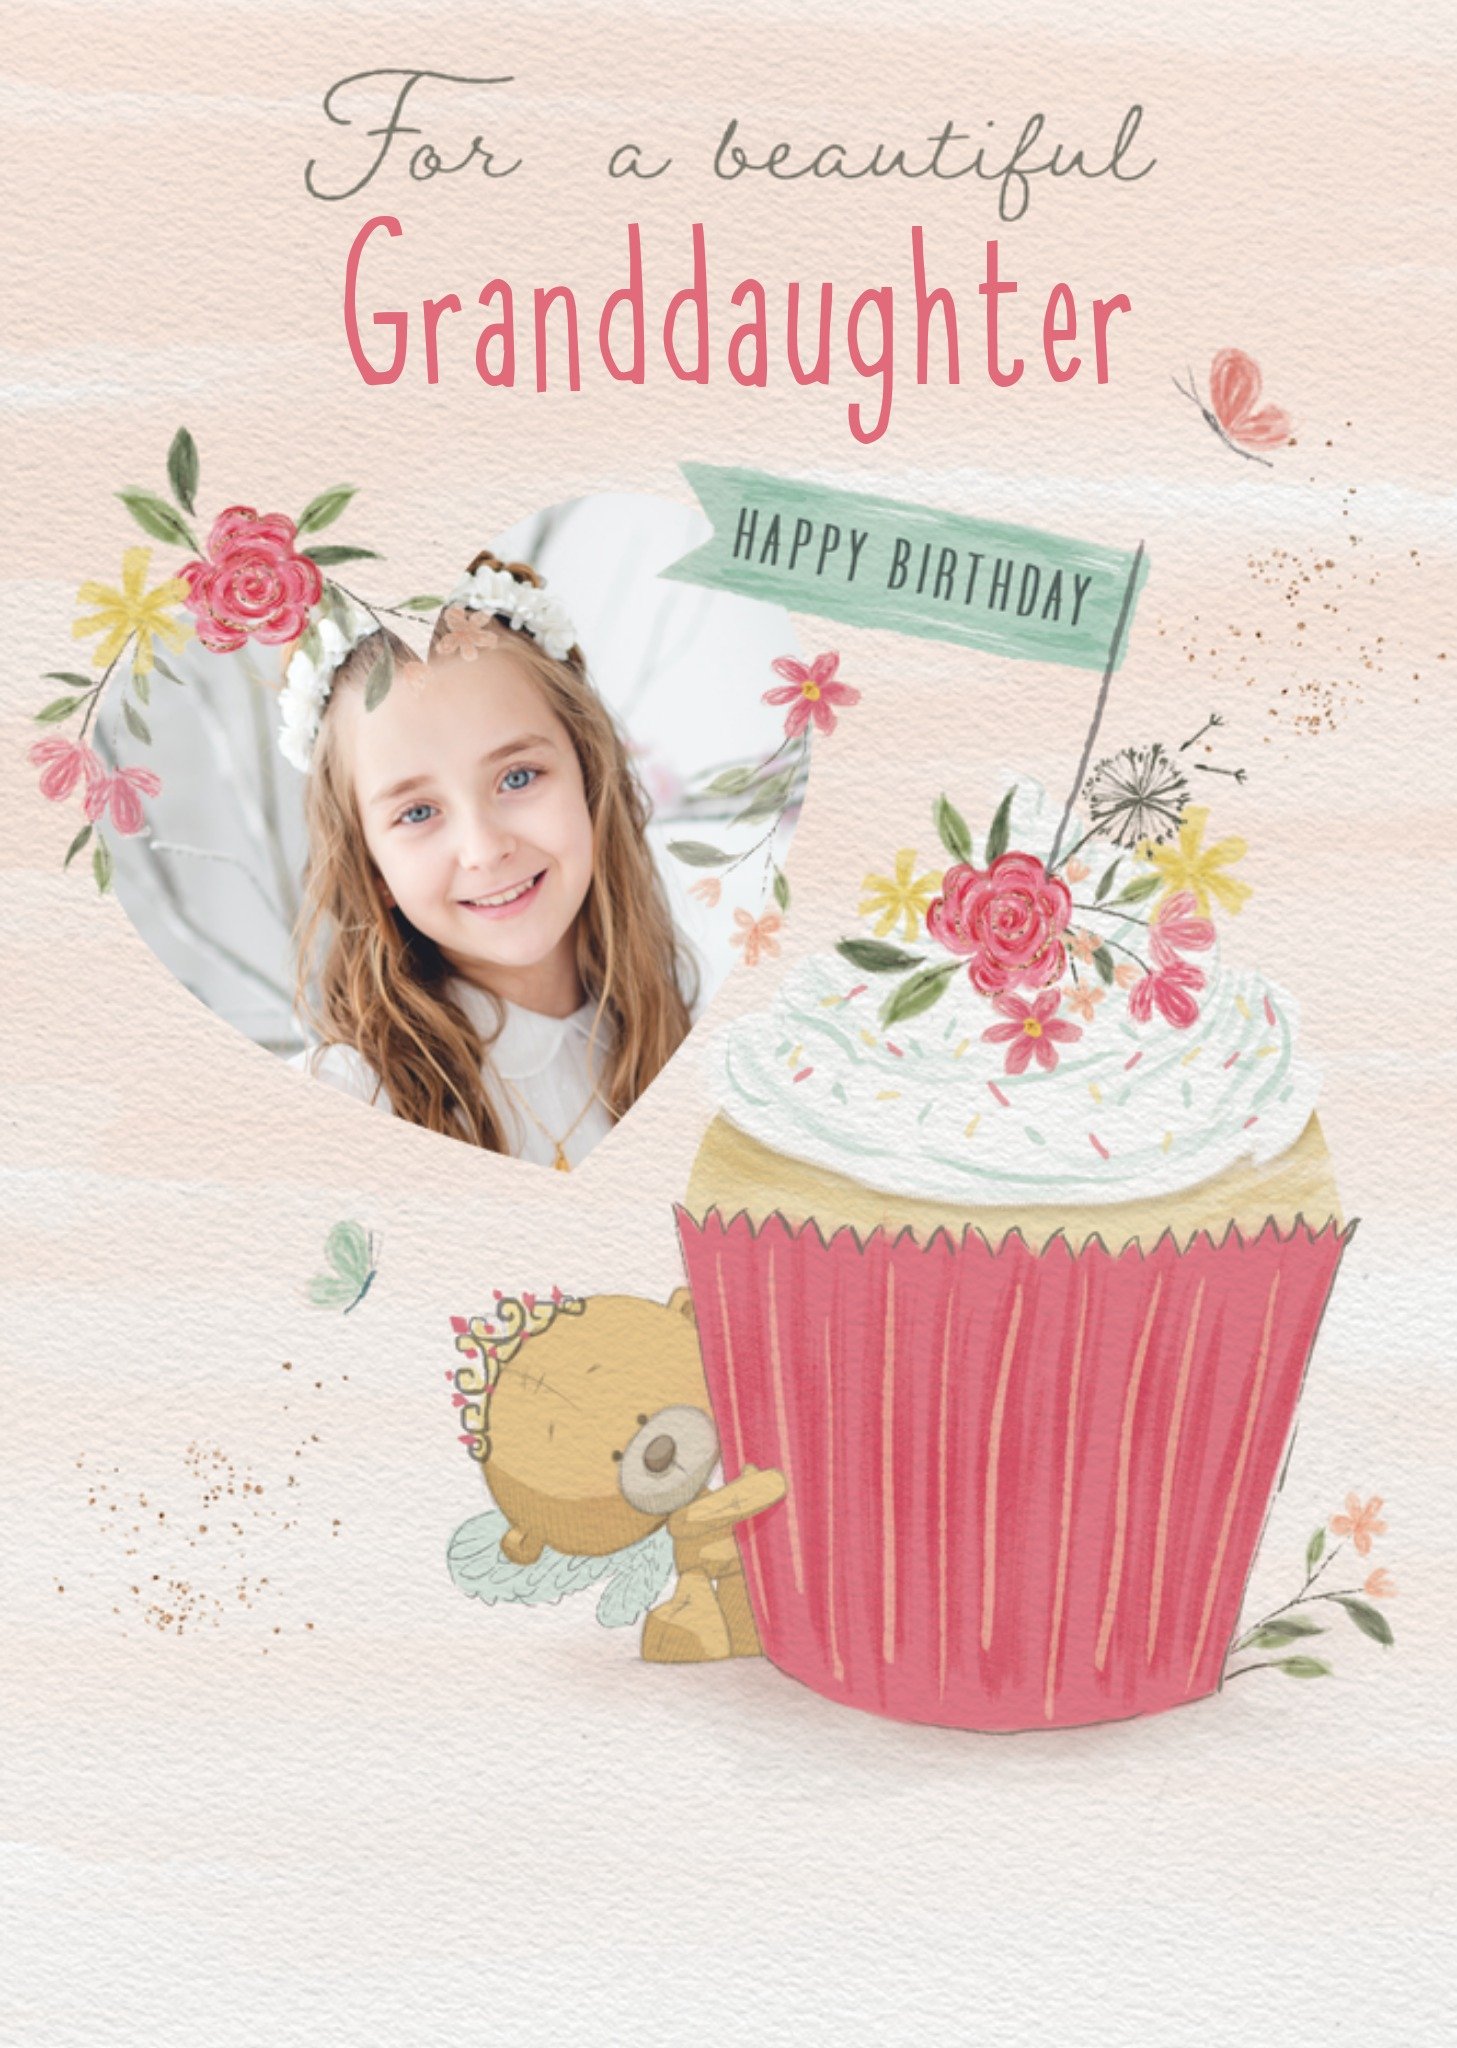 Uddle For A Beautiful Granddaughter Illustrated Cupcake Photo Upload Birthday Card Ecard